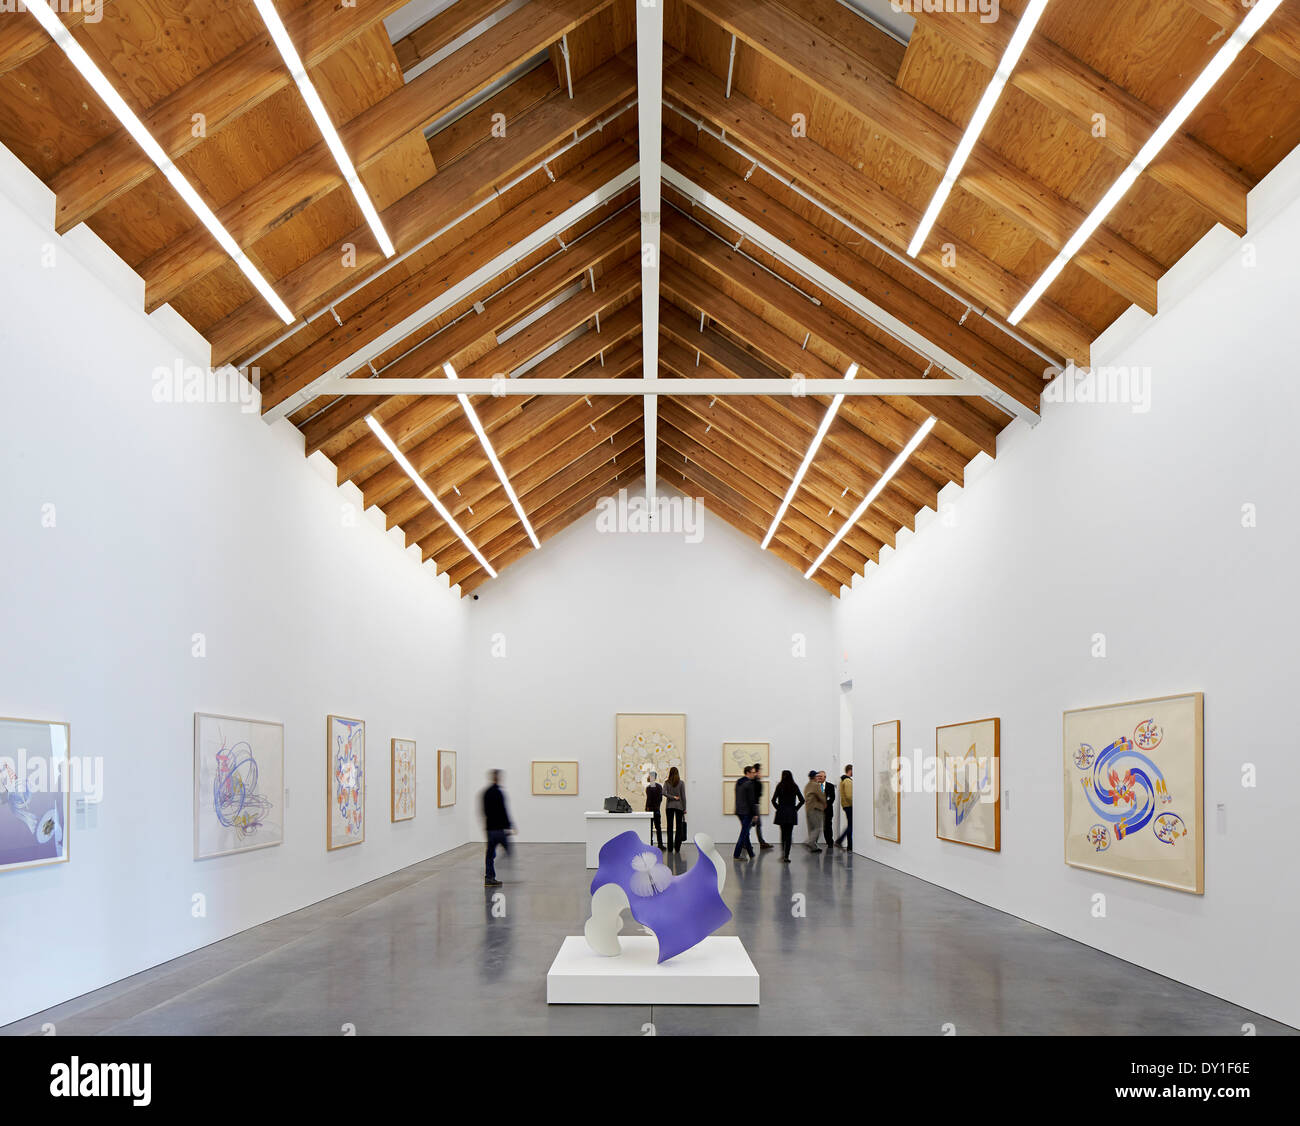 Parrish Art Museum, Water Mill, United States. Architect: Herzog & de Meuron, 2012. Exhibition space with pitched timber ceiling Stock Photo